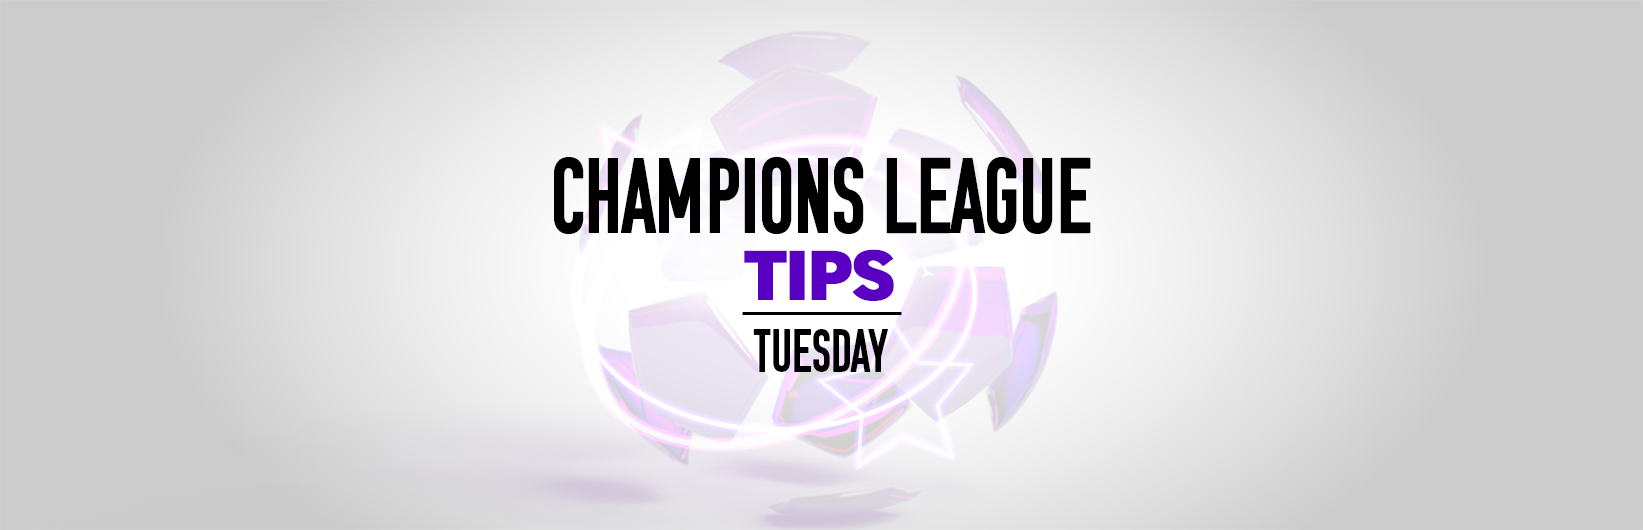 Champions League tips: Best bets for Tuesday’s matches